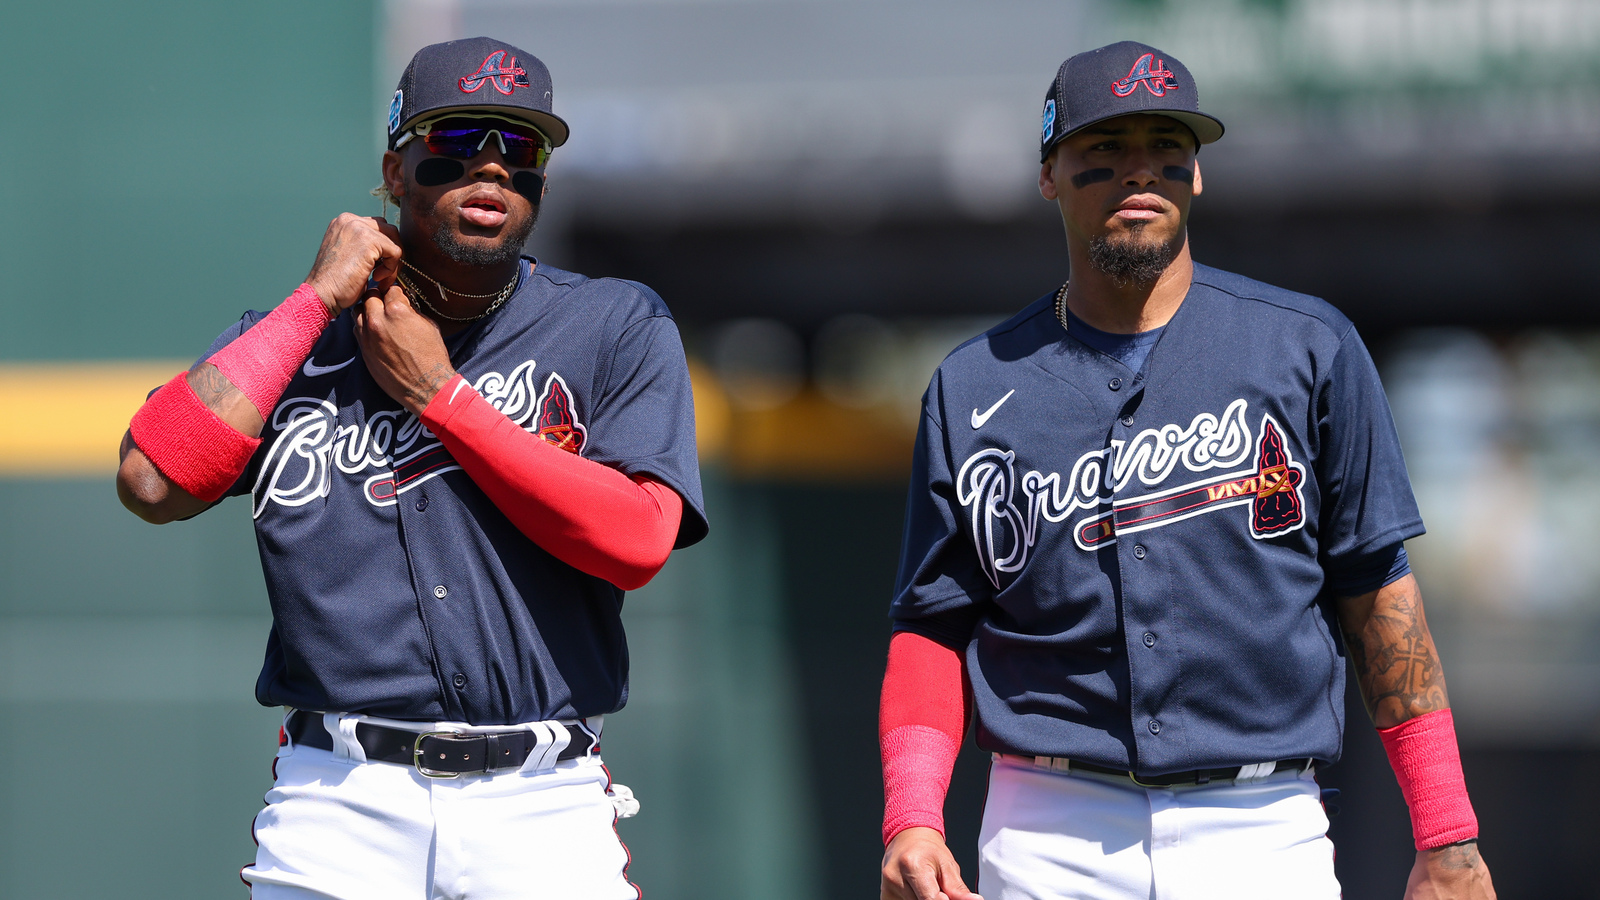 Atlanta Braves show they're serious about keeping young roster